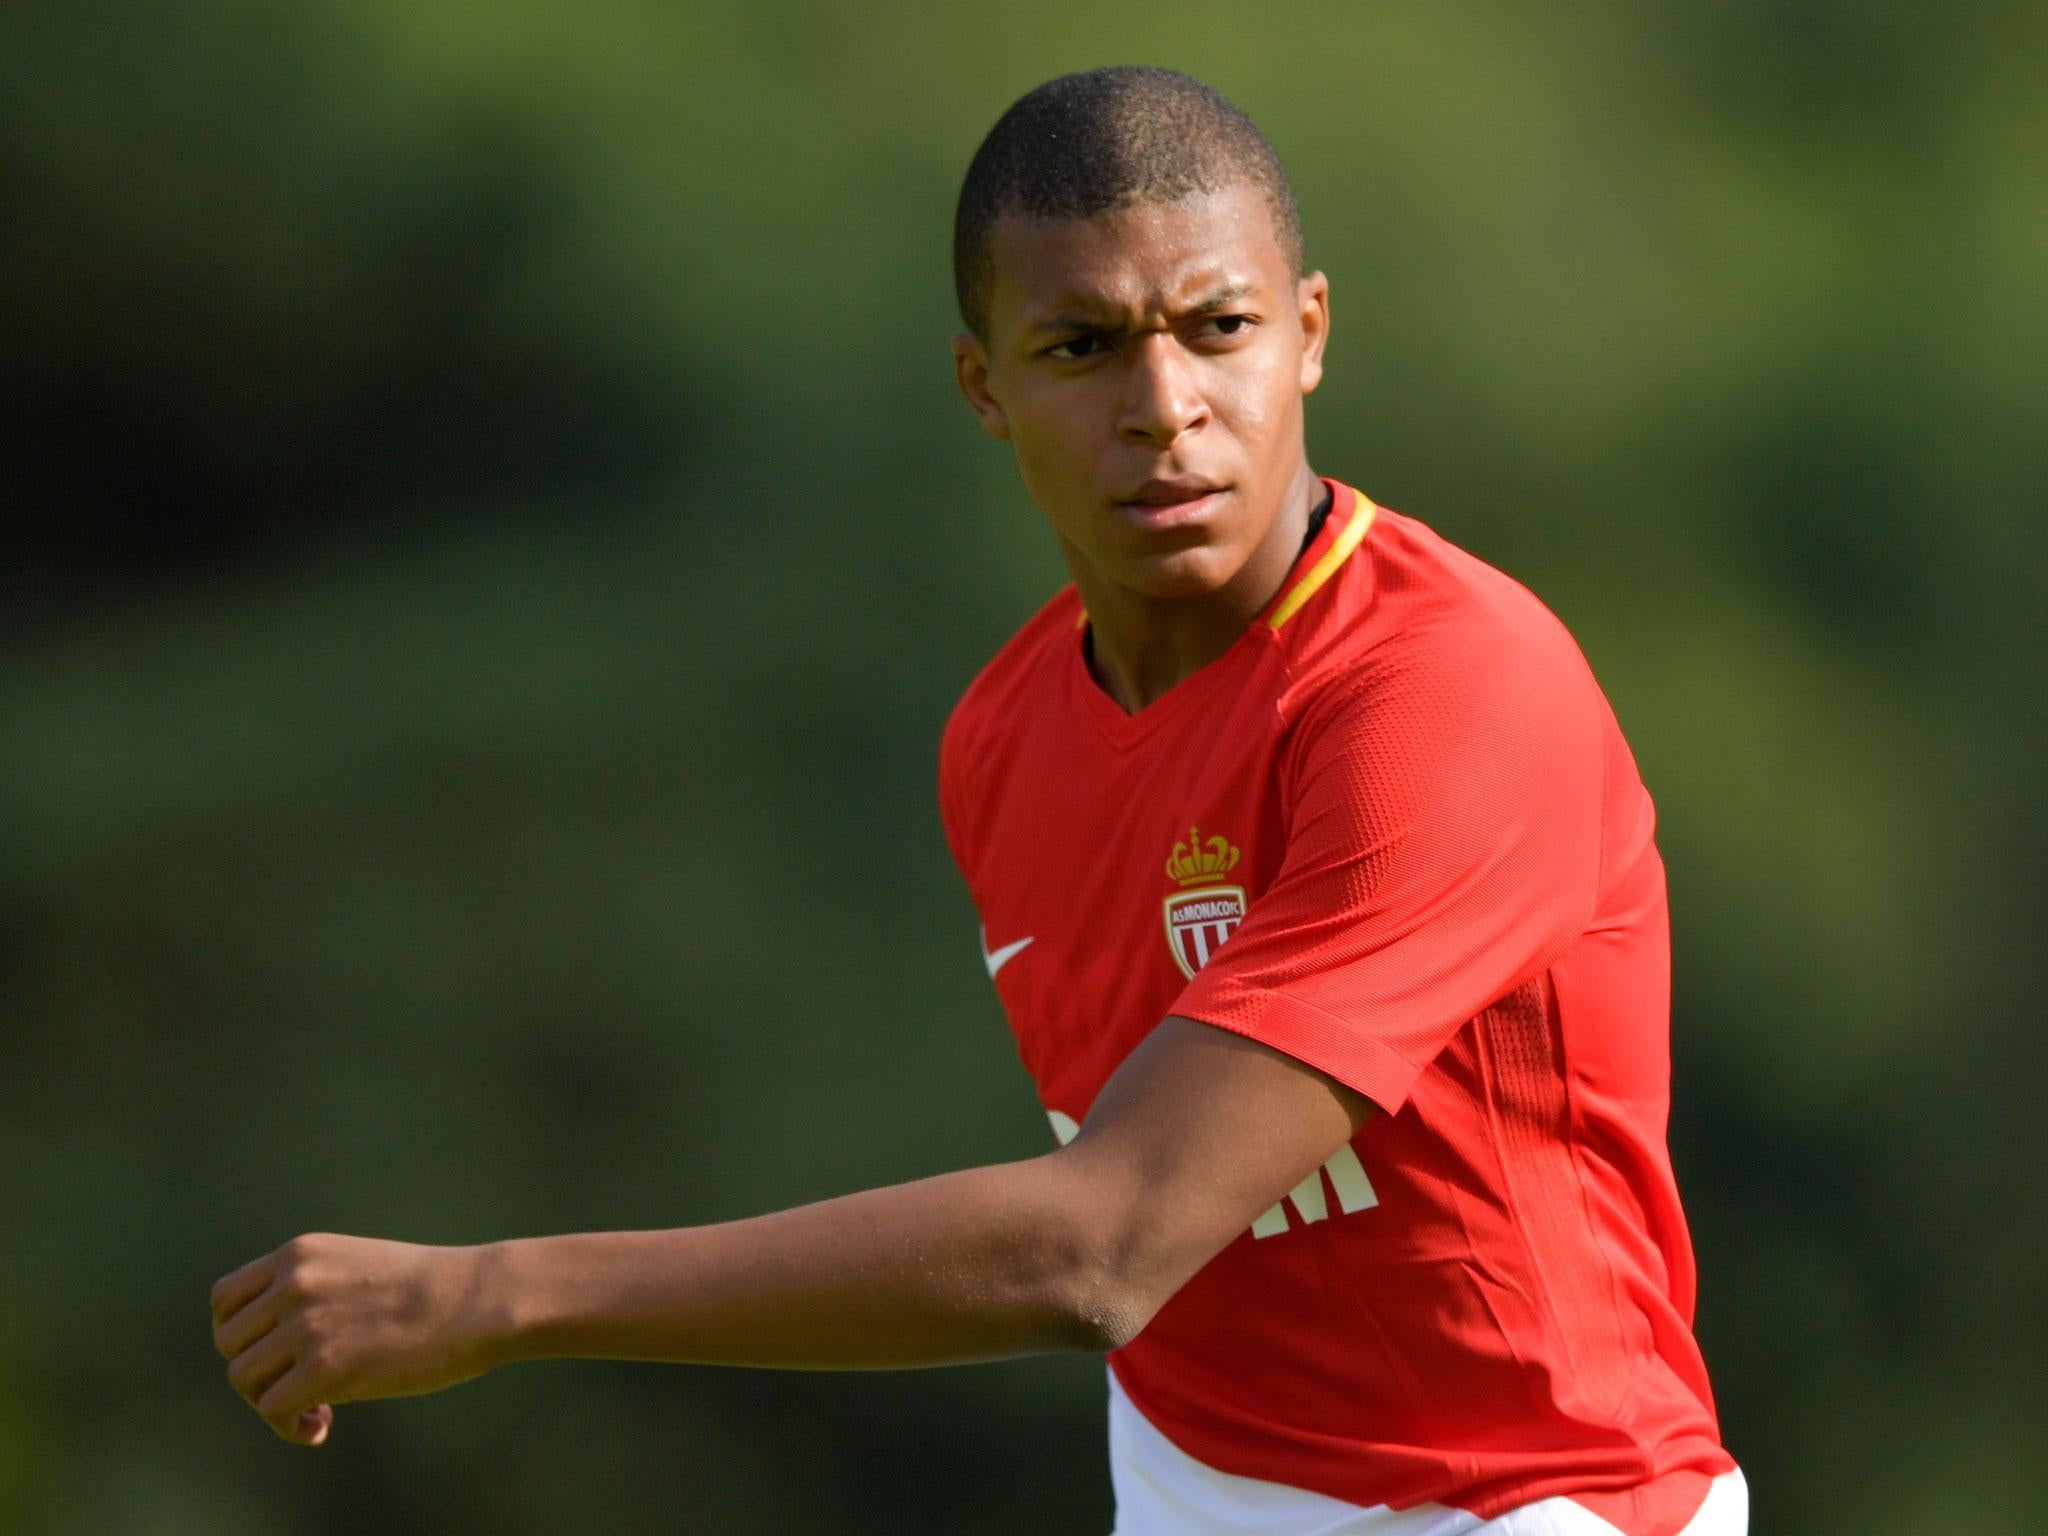 Kylian Mbappe is the most sought-after young player in Europe